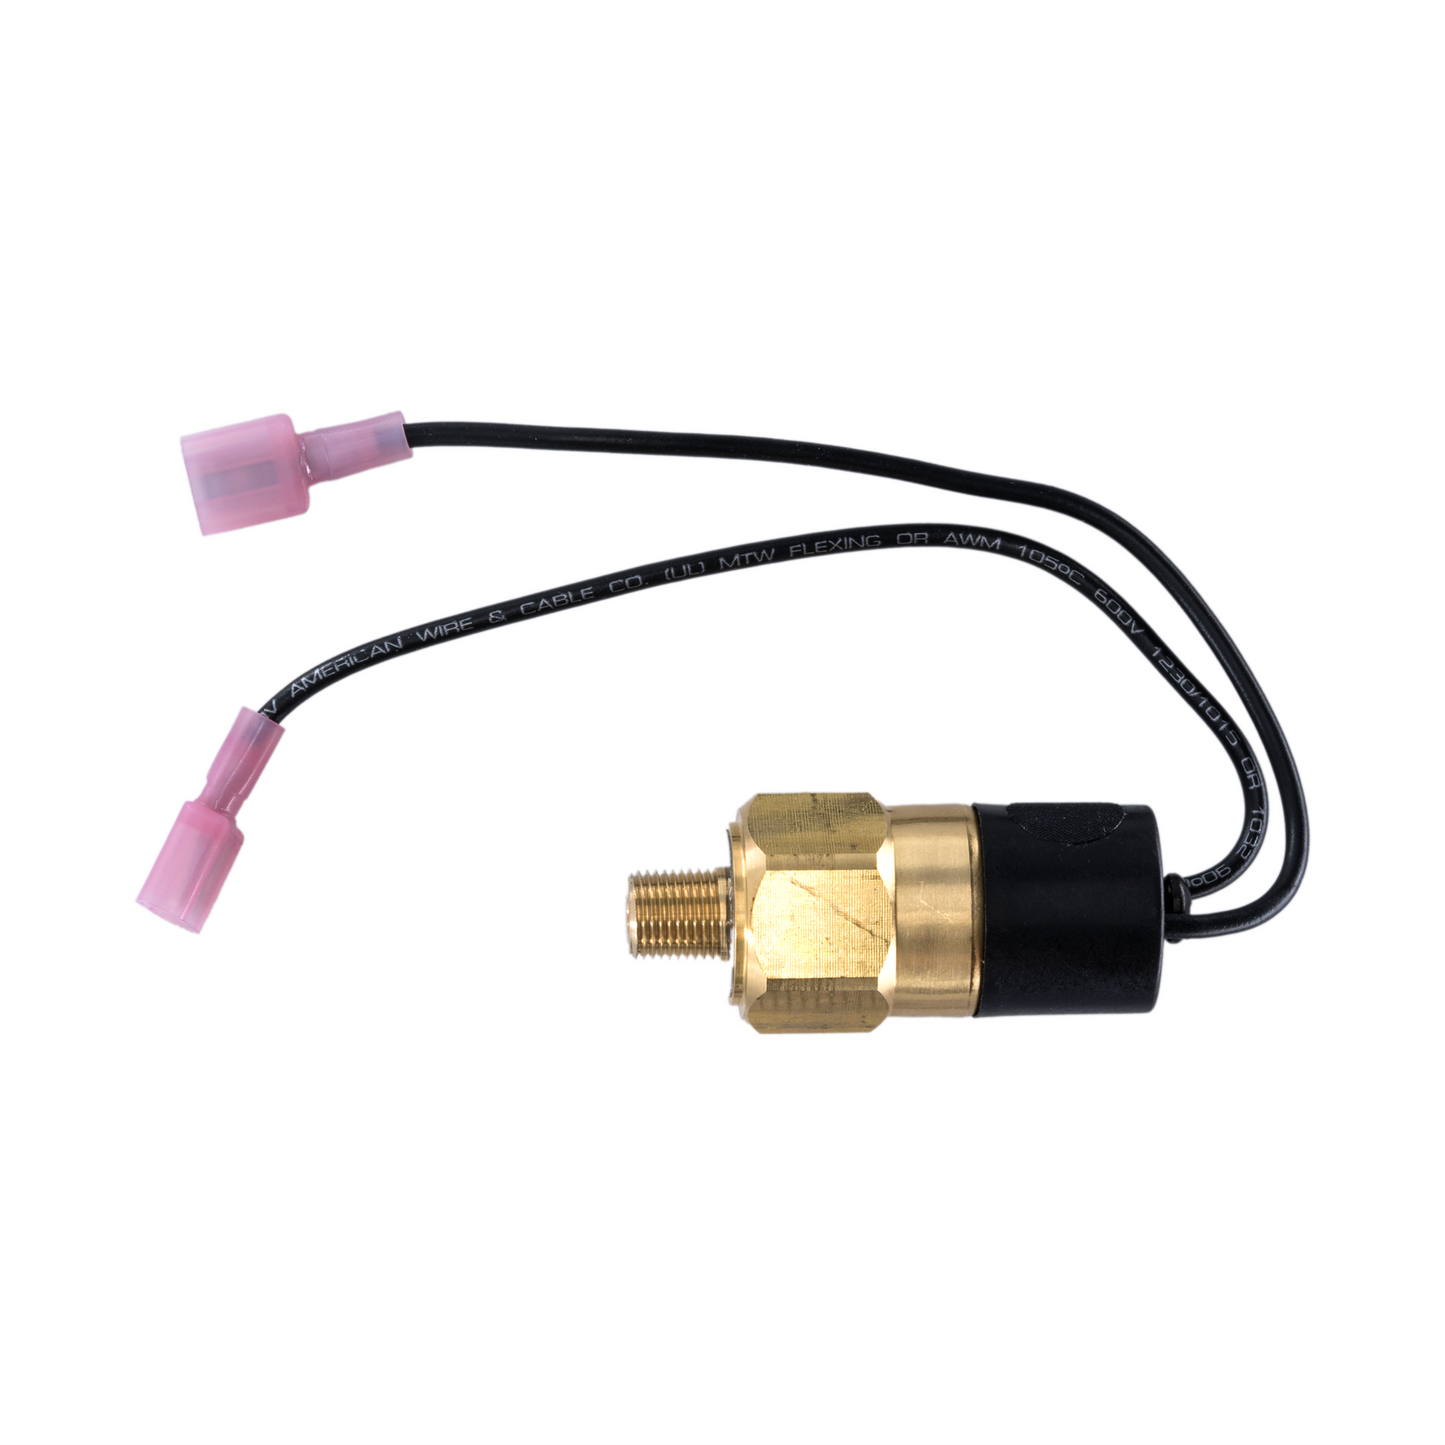 Fuel Pressure Safety Switch Only (High Pressure)